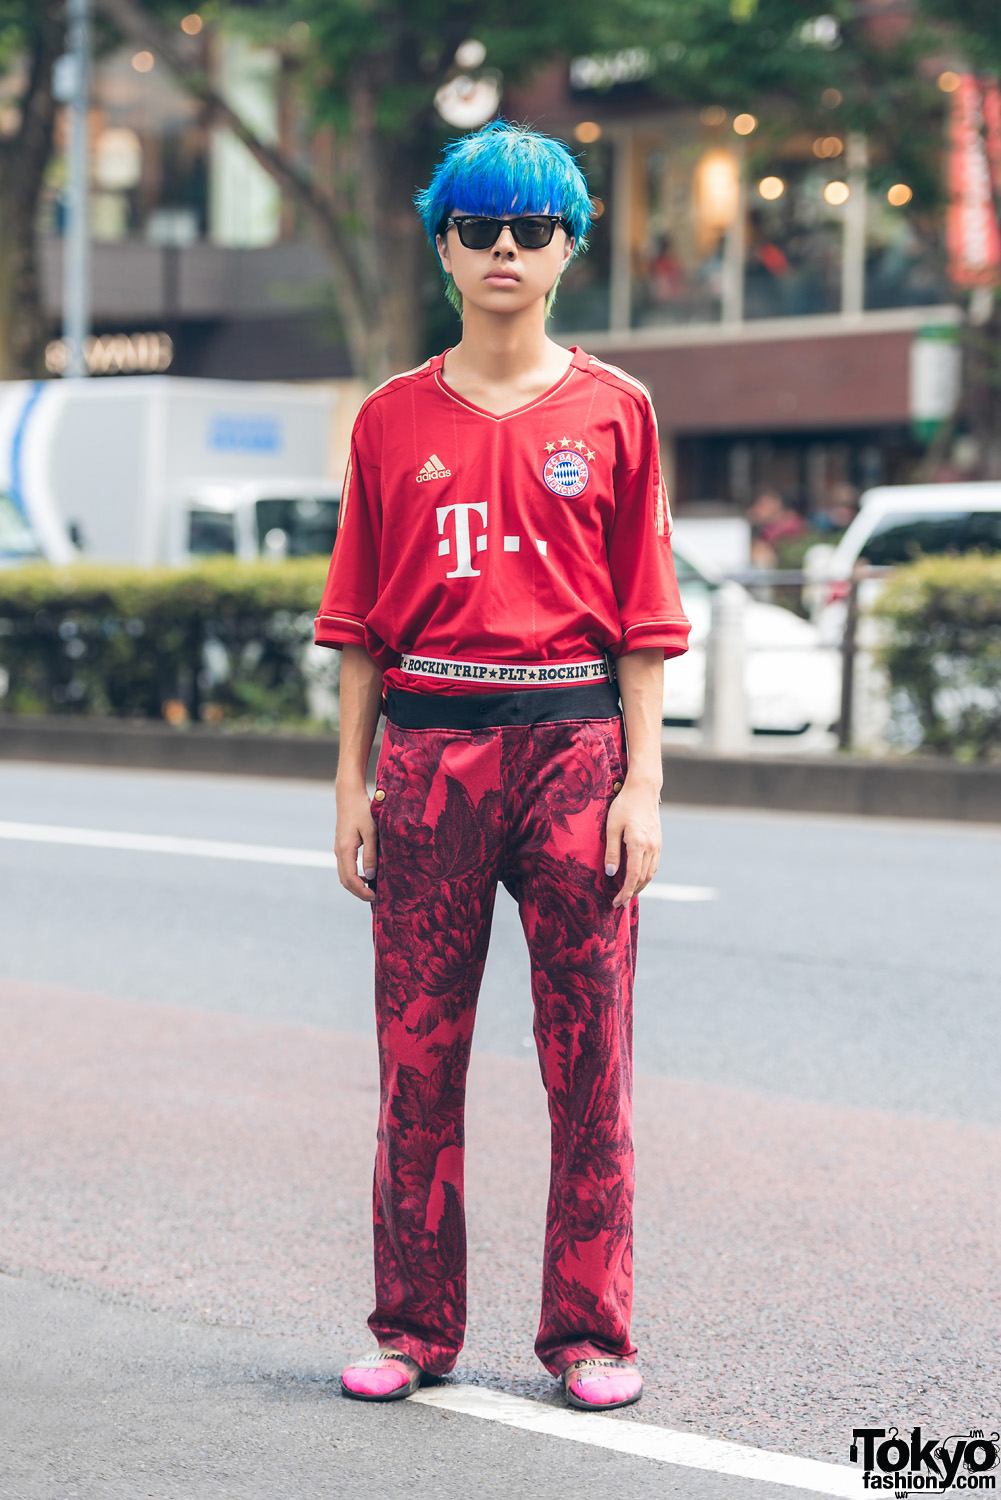 Blue-Haired Harajuku Guy in All Red Street Style w/ Vintage Jersey & Pants, John Galliano Sliders & Ray-Ban Sunglasses